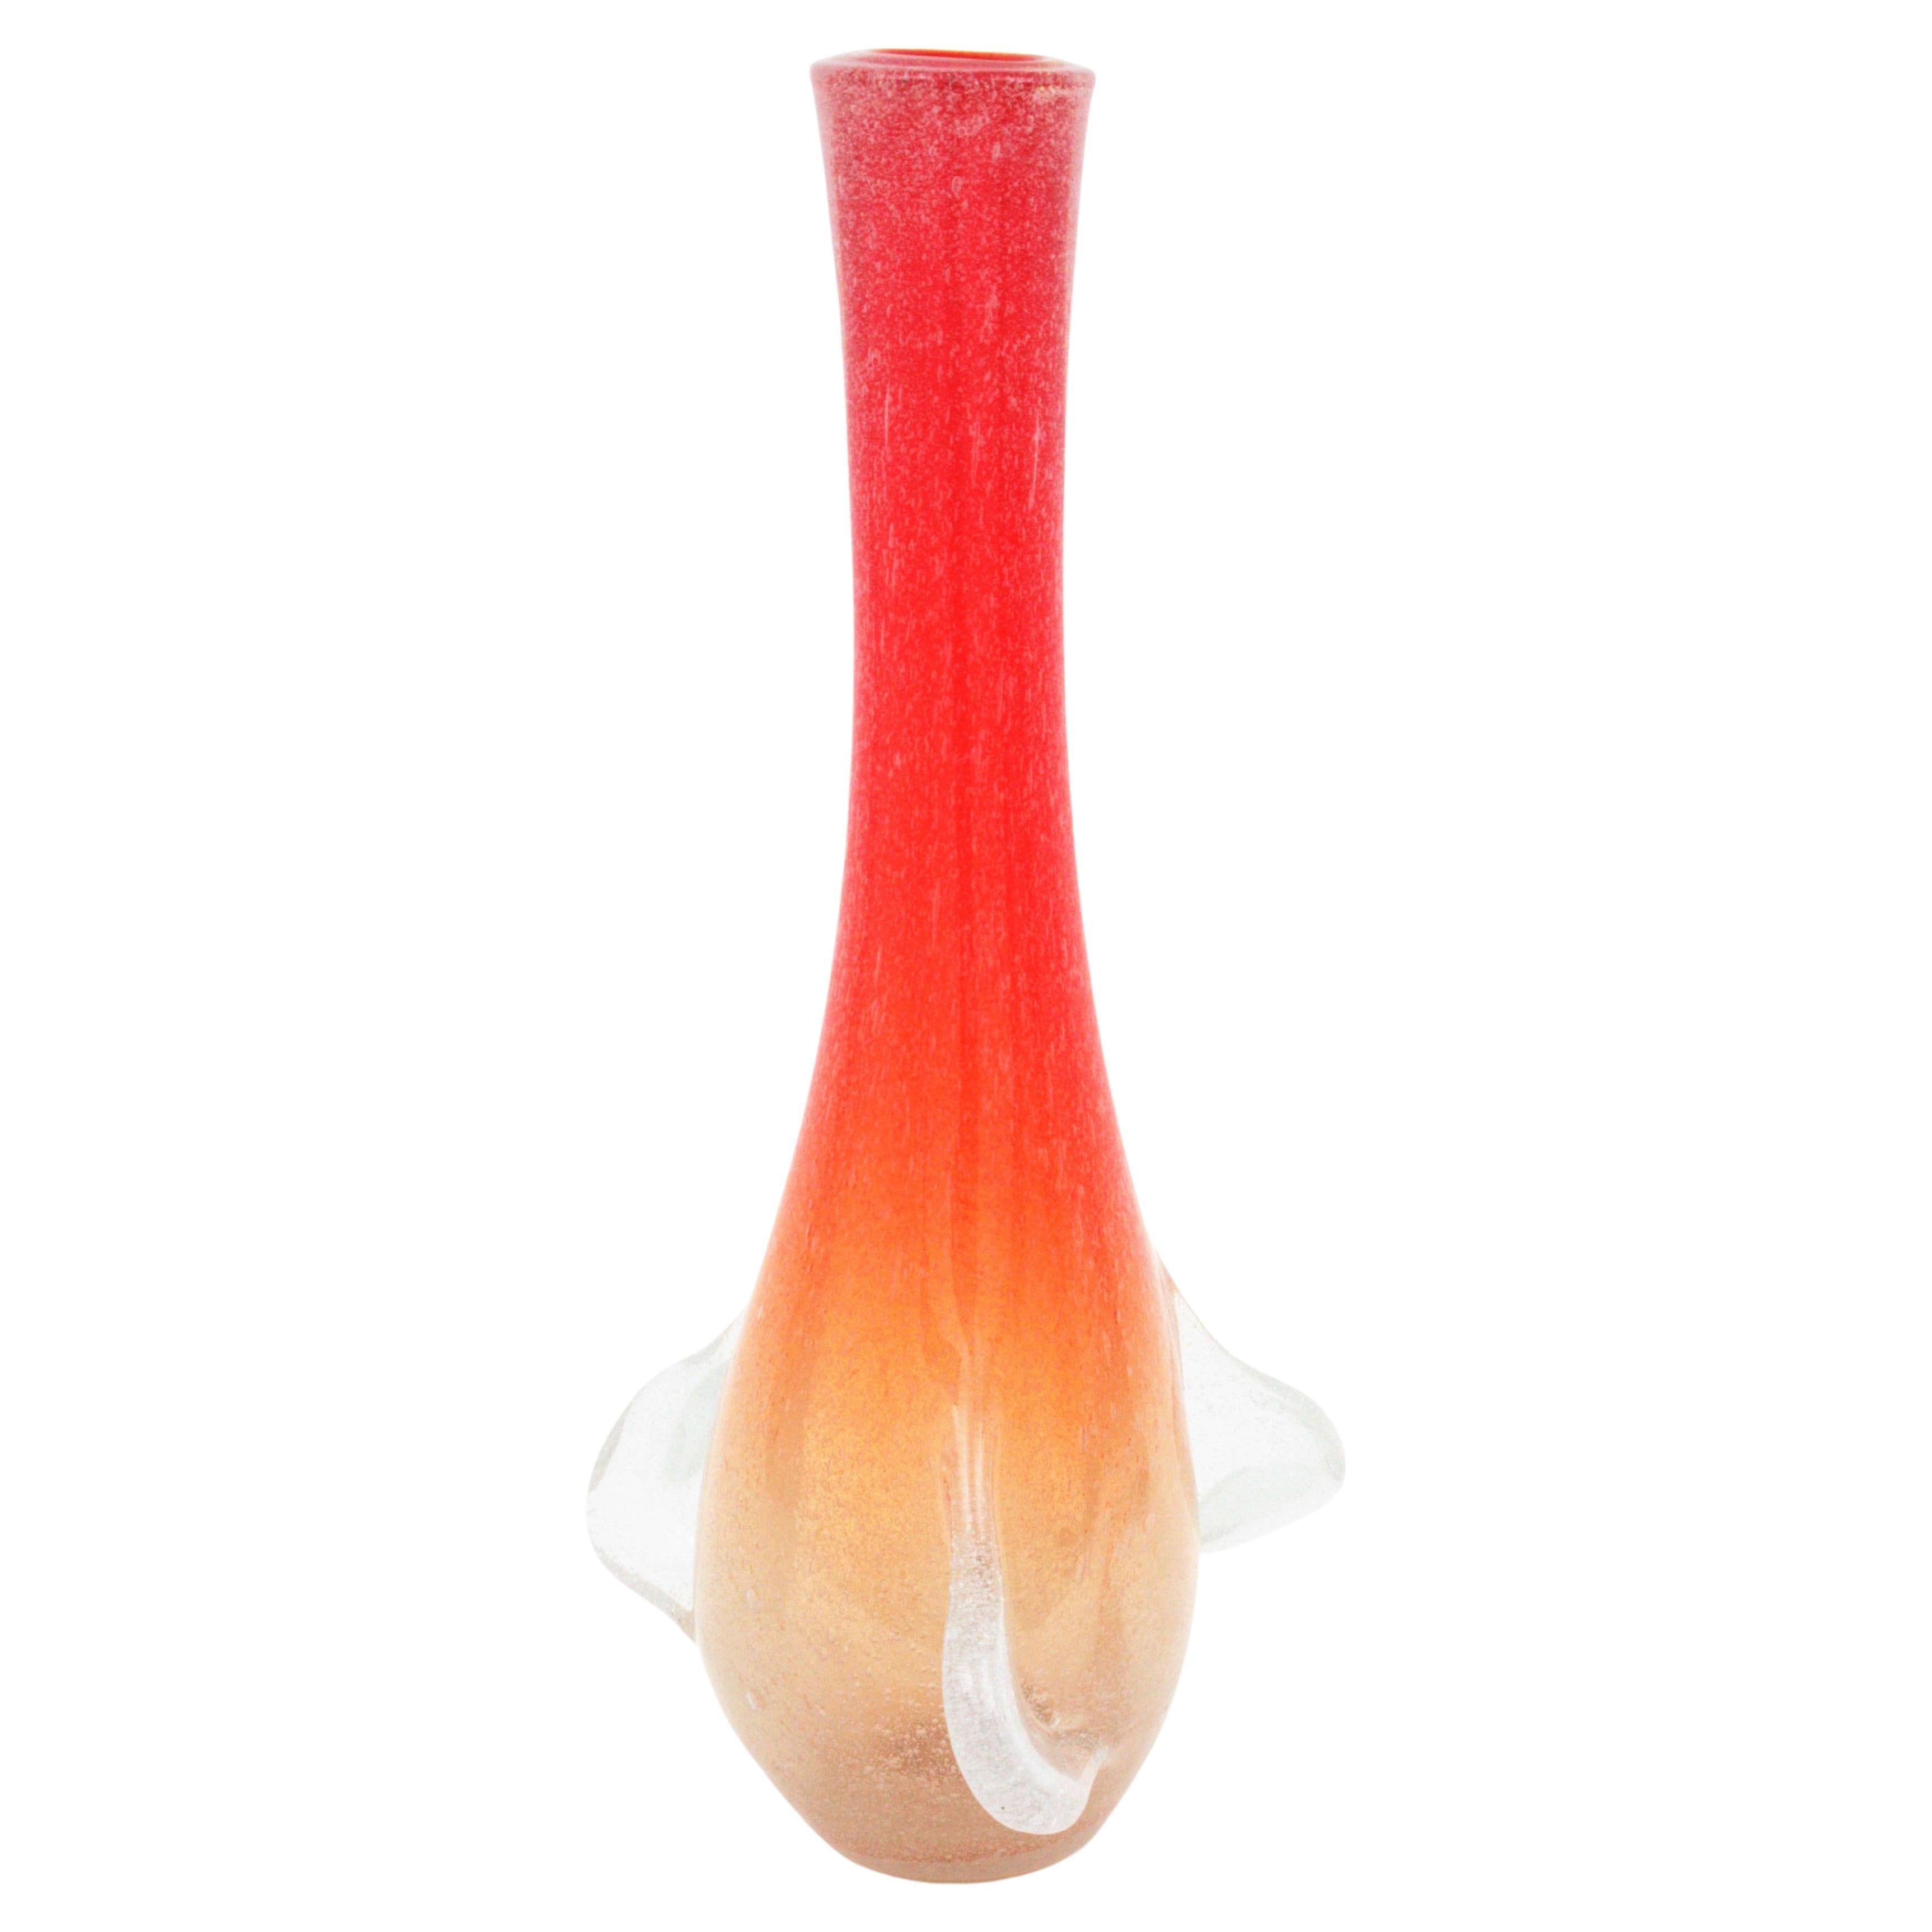 Oversized hand blown Murano Art glass vase with inner air bubbles. Attributed to Seguso Vetri d'Arte. Italy, 1950s.
This eye-catching Murano glass tall vase is made in shades of red orange to clear glass and pulled details. It is made with the